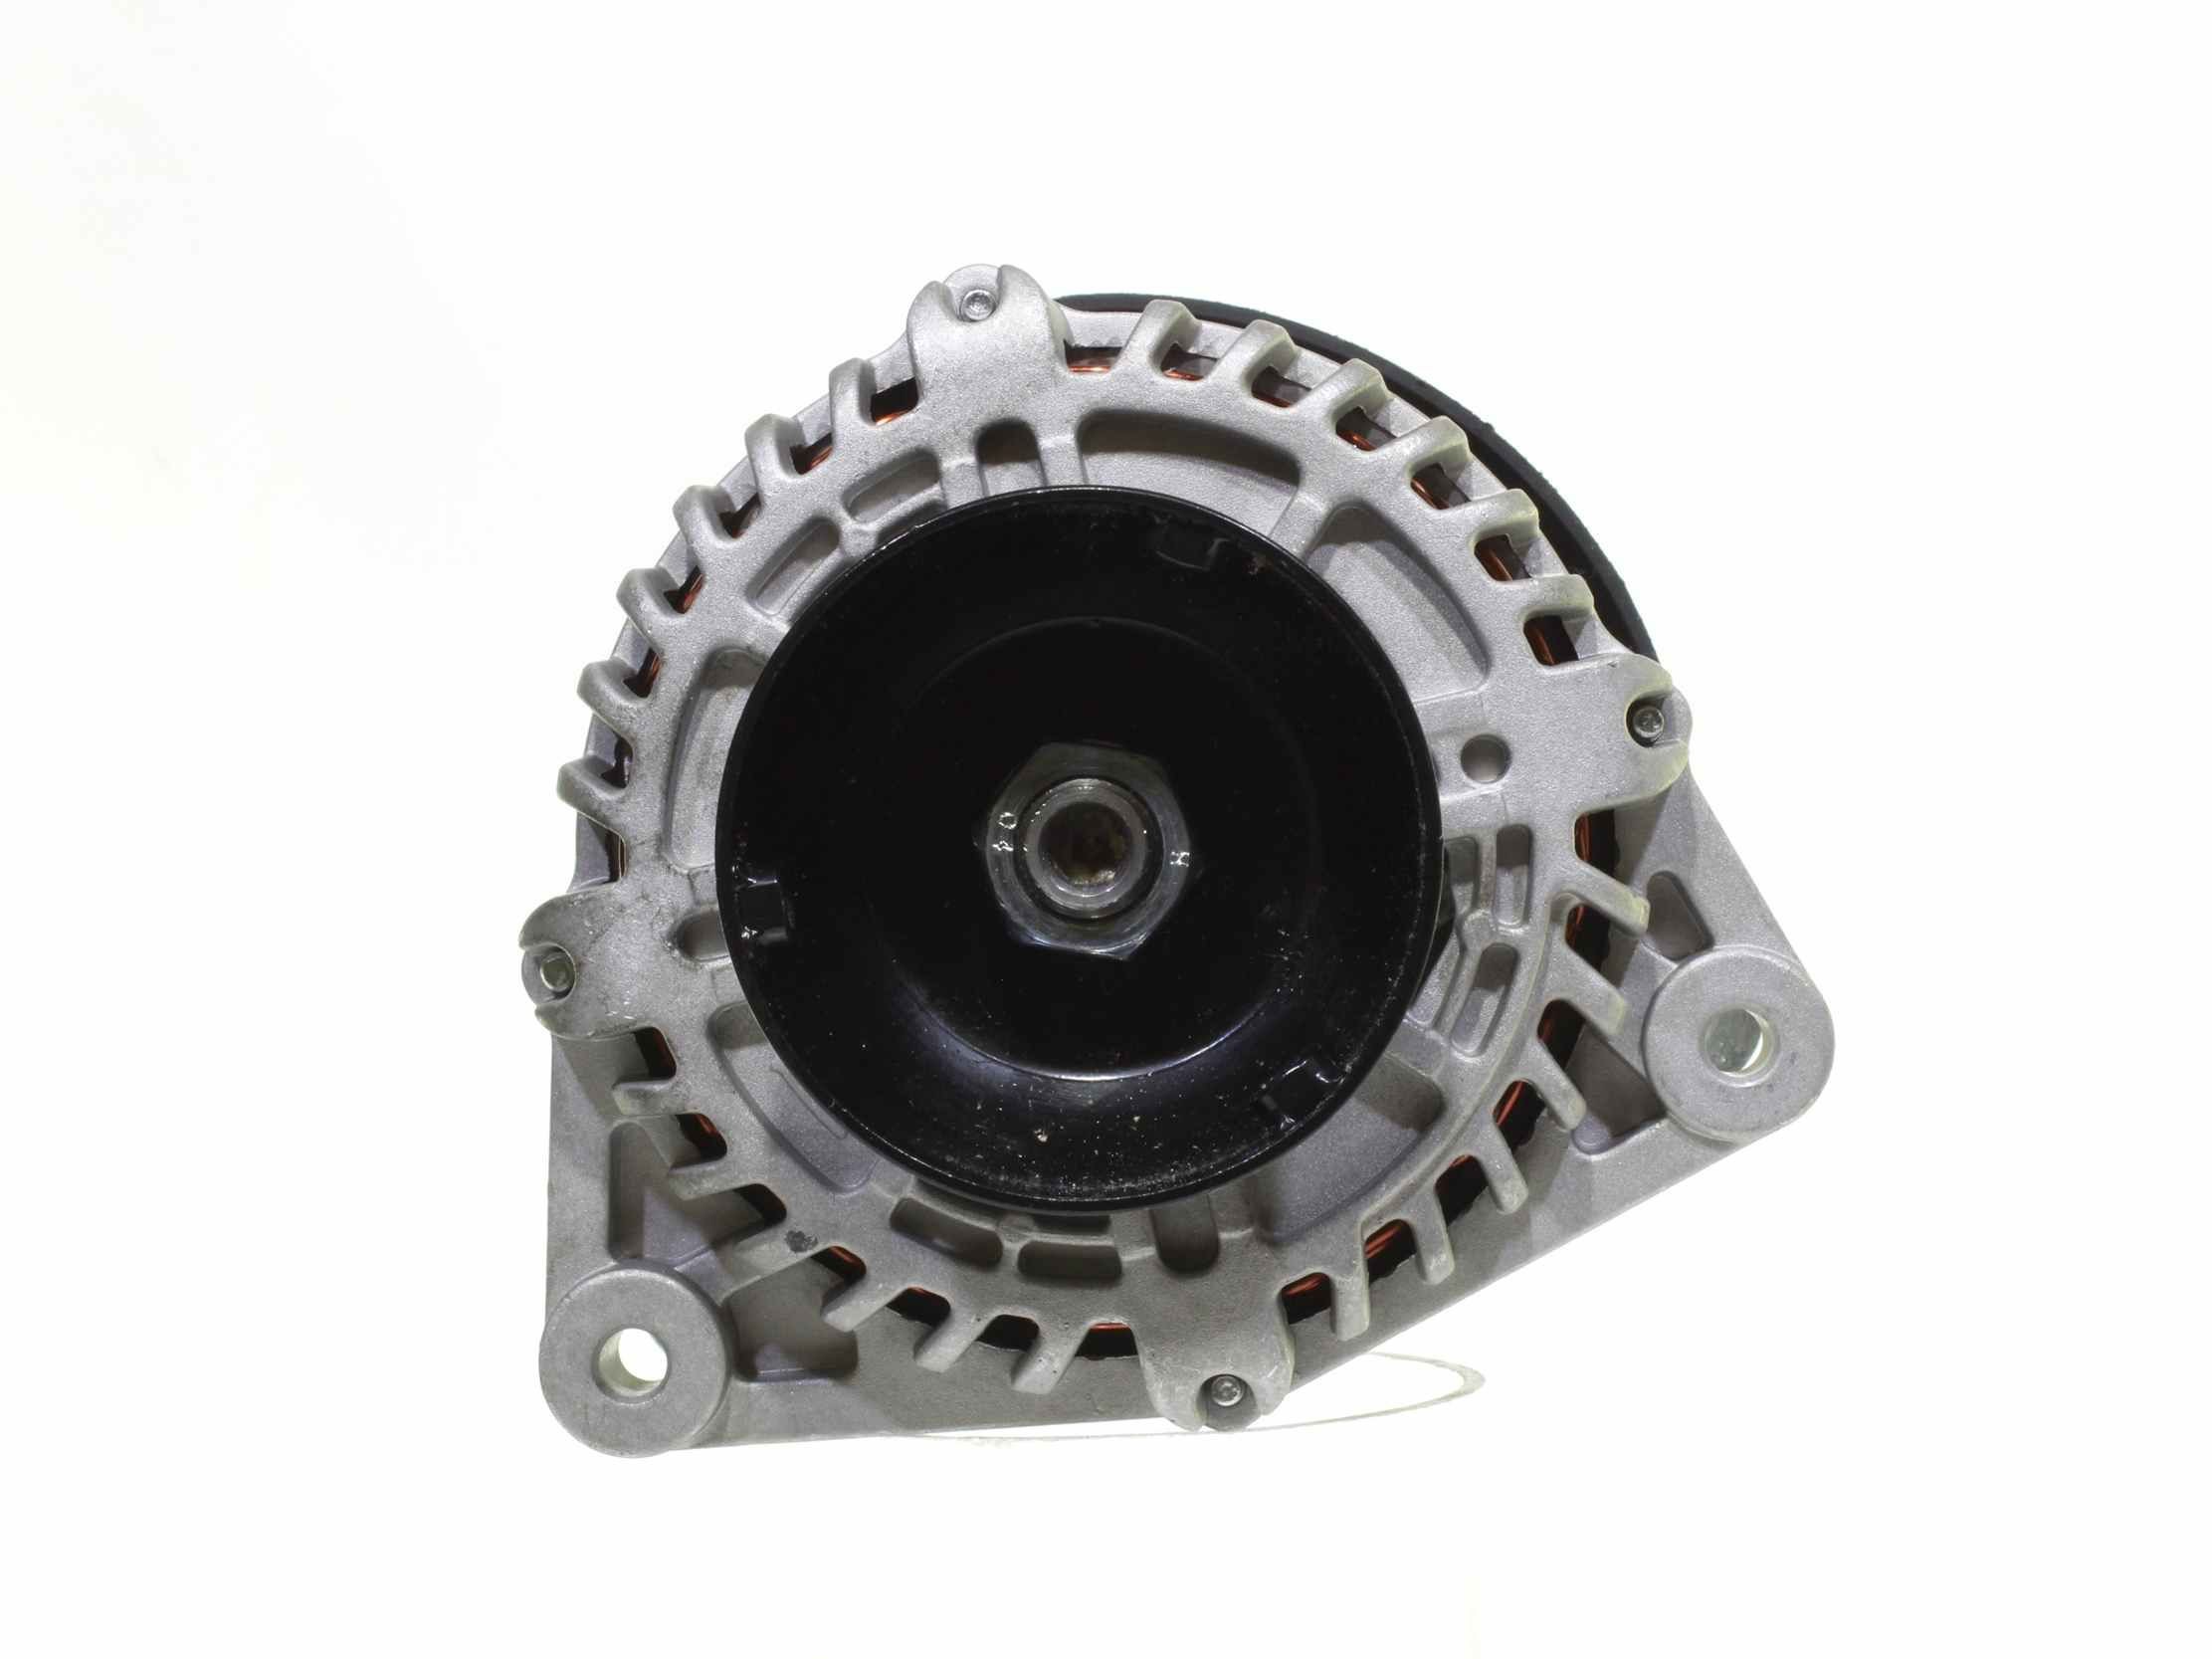 ALANKO Alternator 10443137 for FORD FOCUS, TOURNEO CONNECT, TRANSIT CONNECT